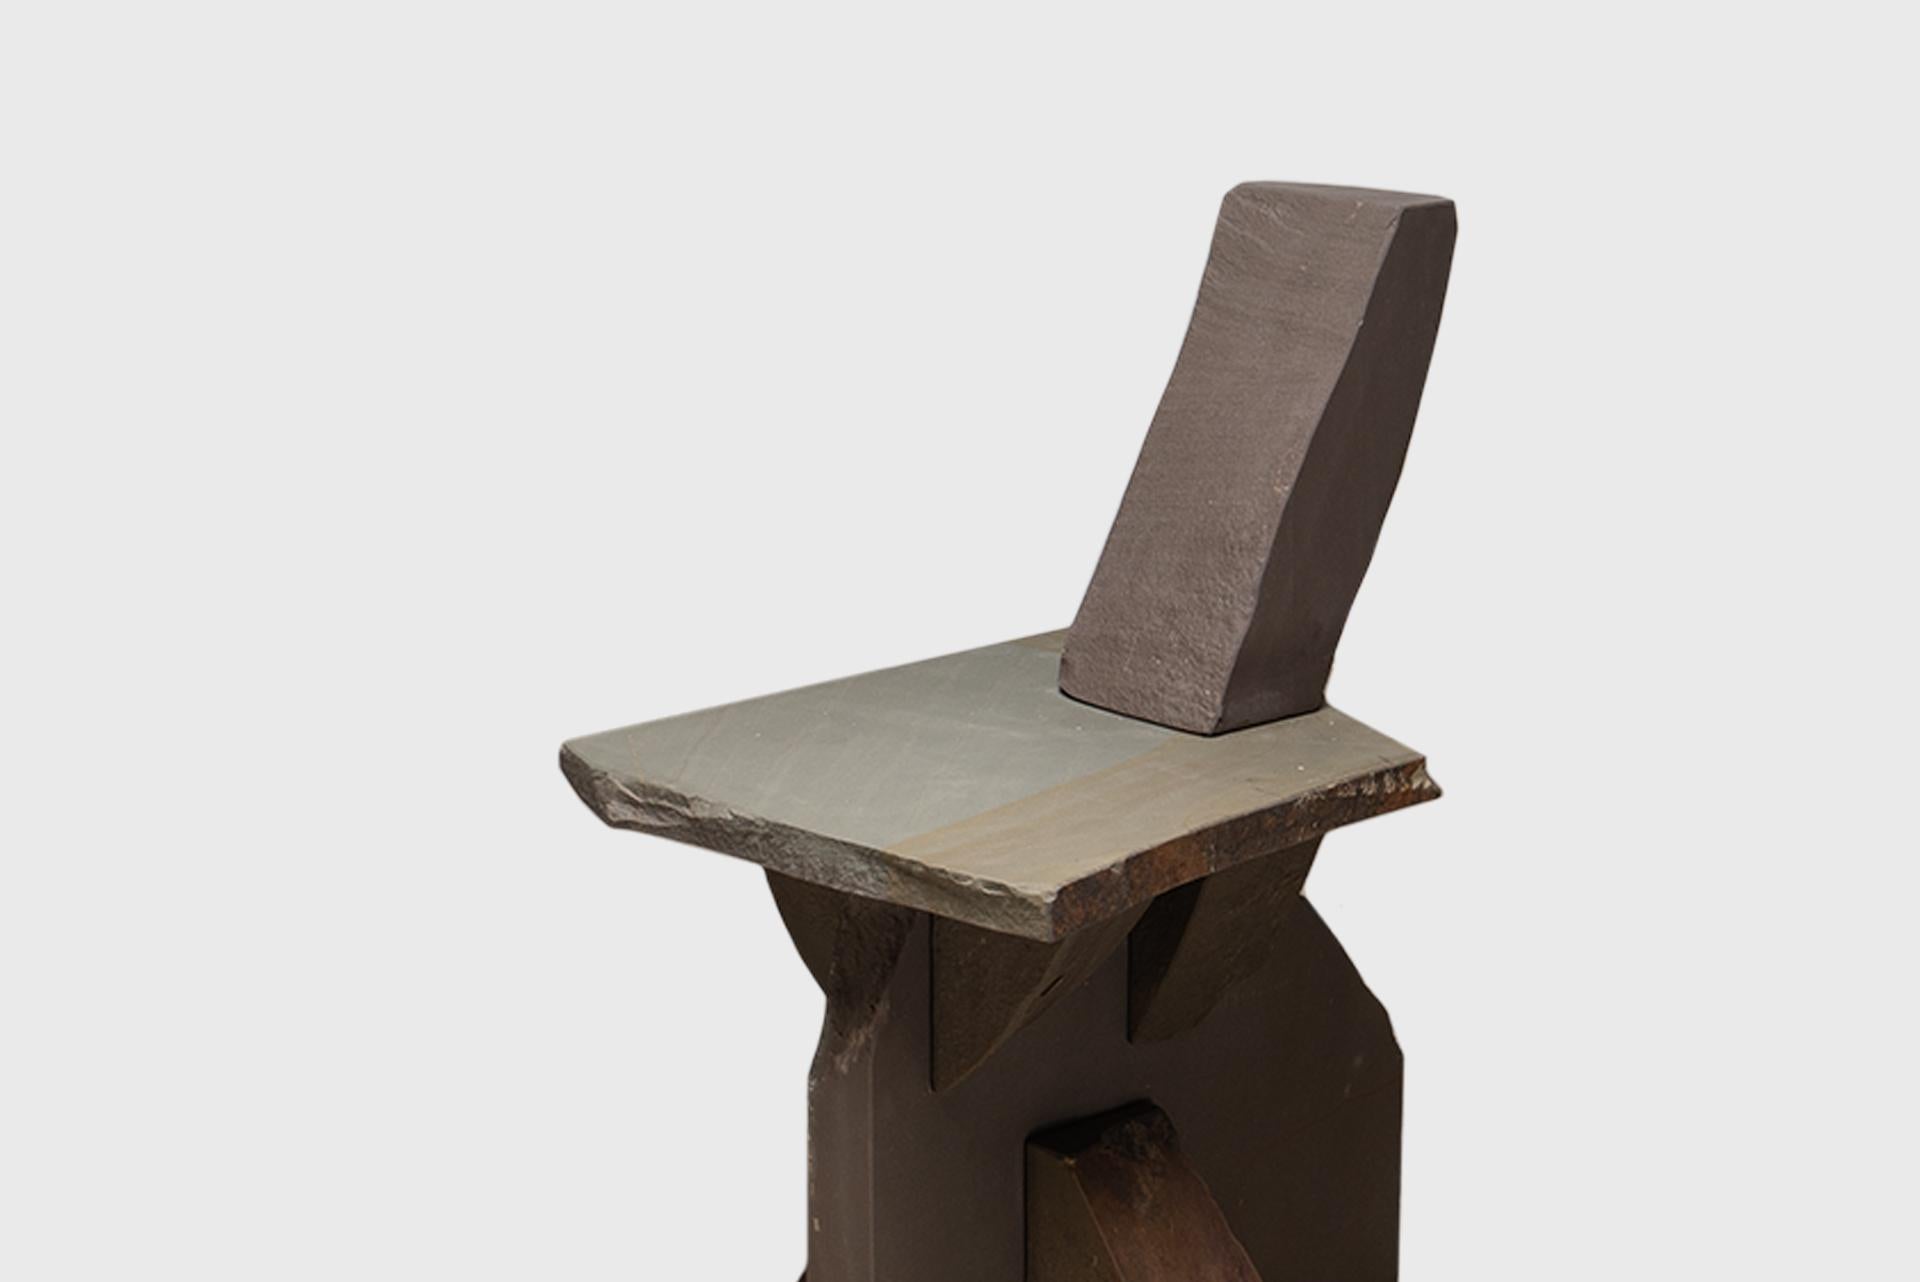 Contemporary Natural Chair 18, Graywacke Offcut Gray Stone, Carsten in der Elst For Sale 2